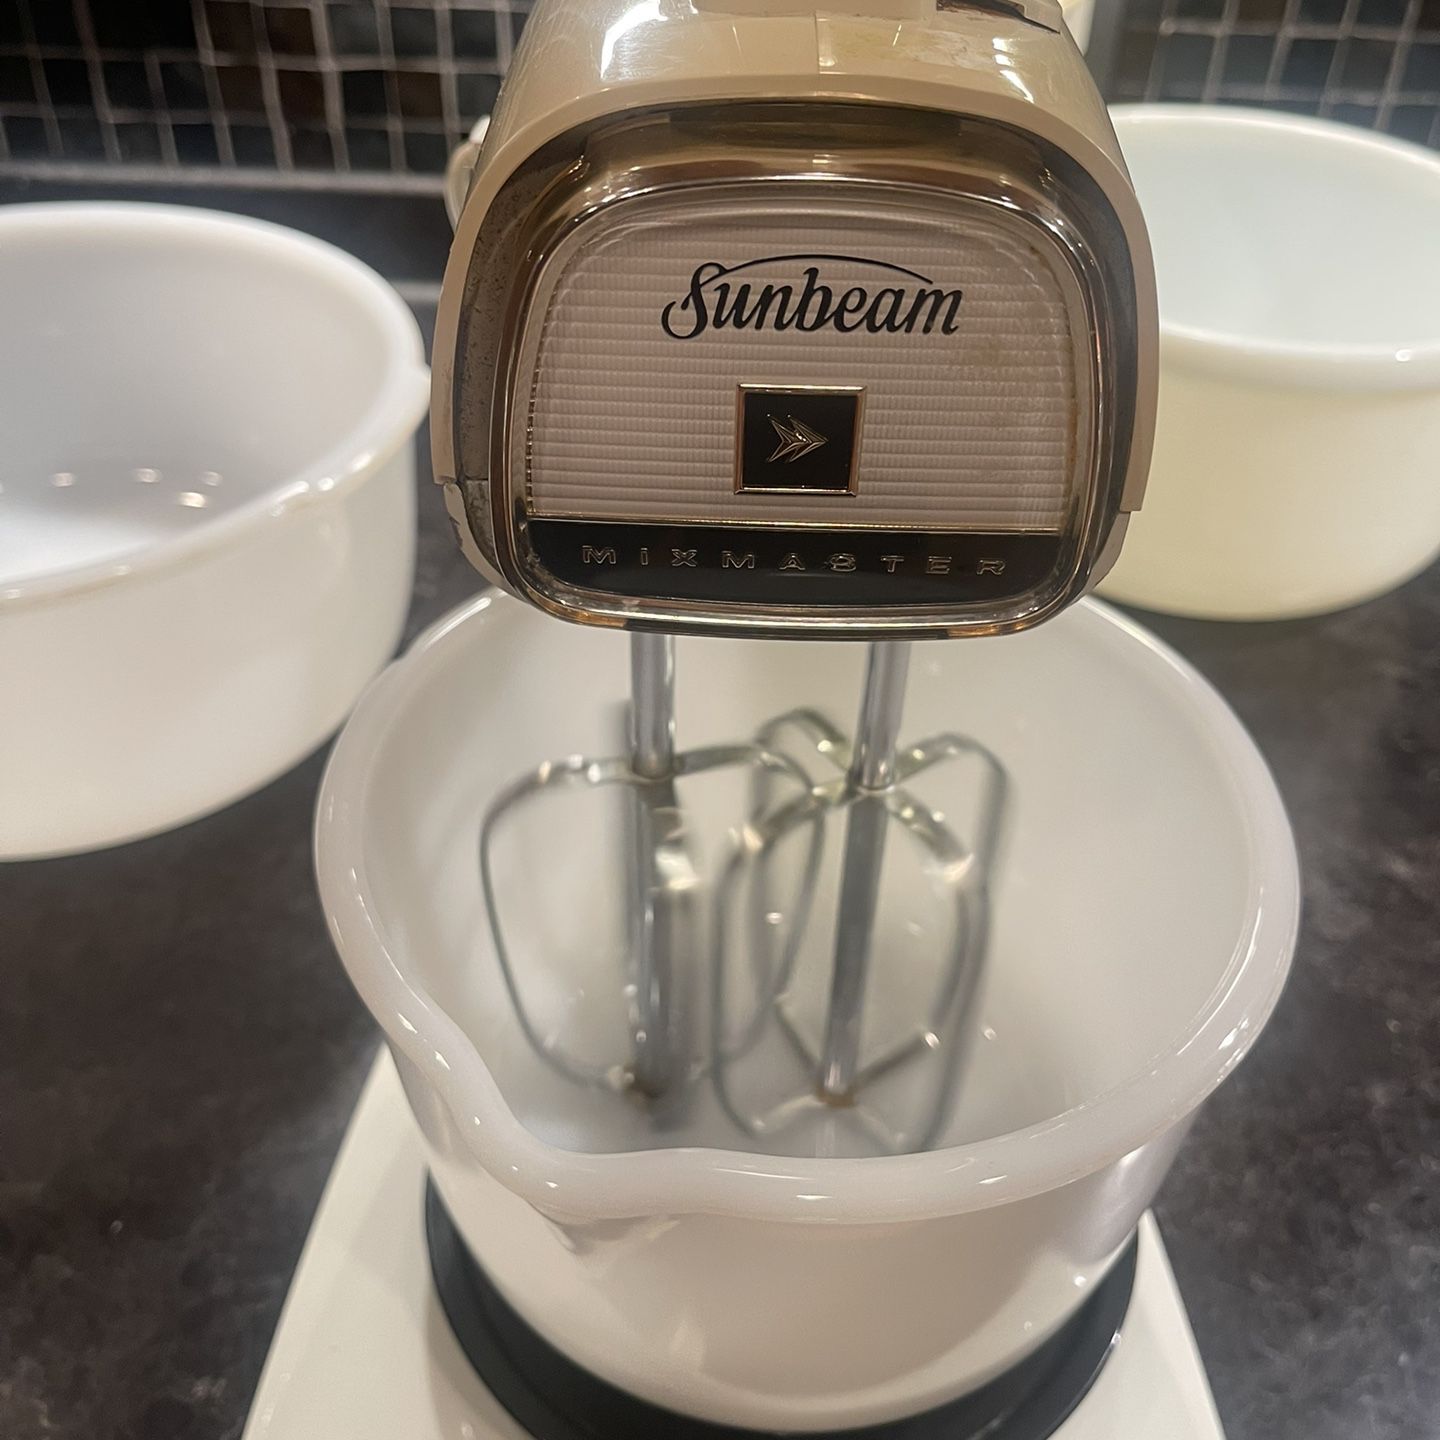 Vintage 1960s Sunbeam Mixmaster Mixer With Two Mixing Bowls and